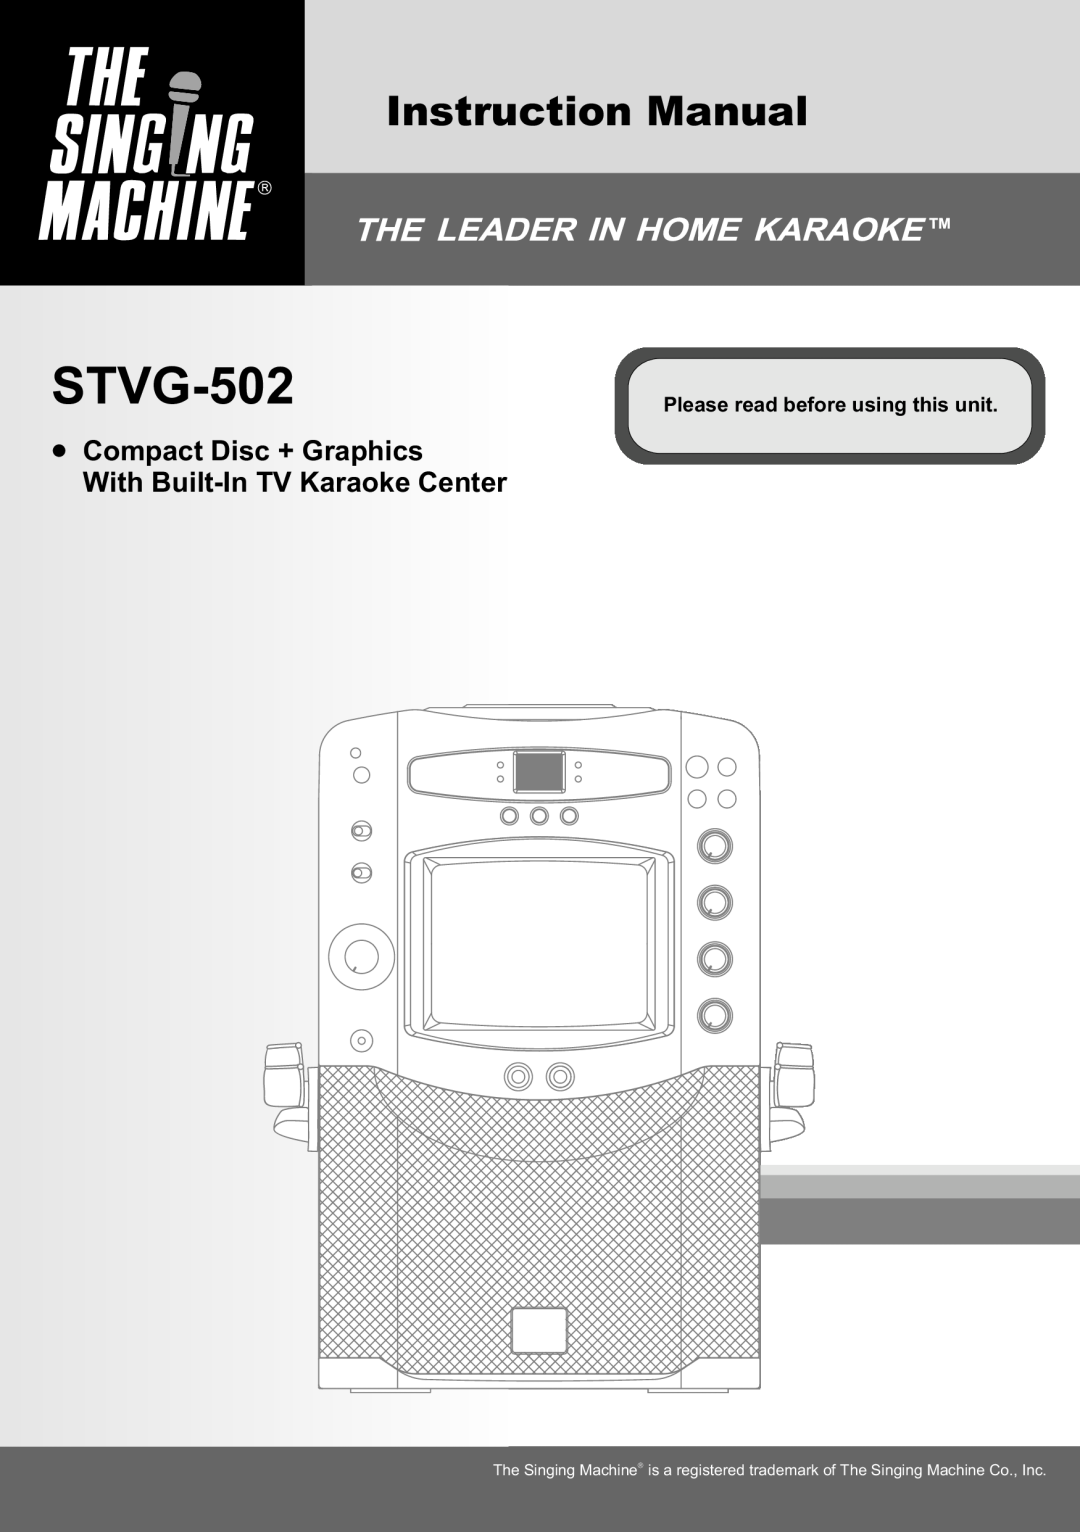 The Singing Machine STVG-502 instruction manual Compact Disc + Graphics, With Built-InTV Karaoke Center 